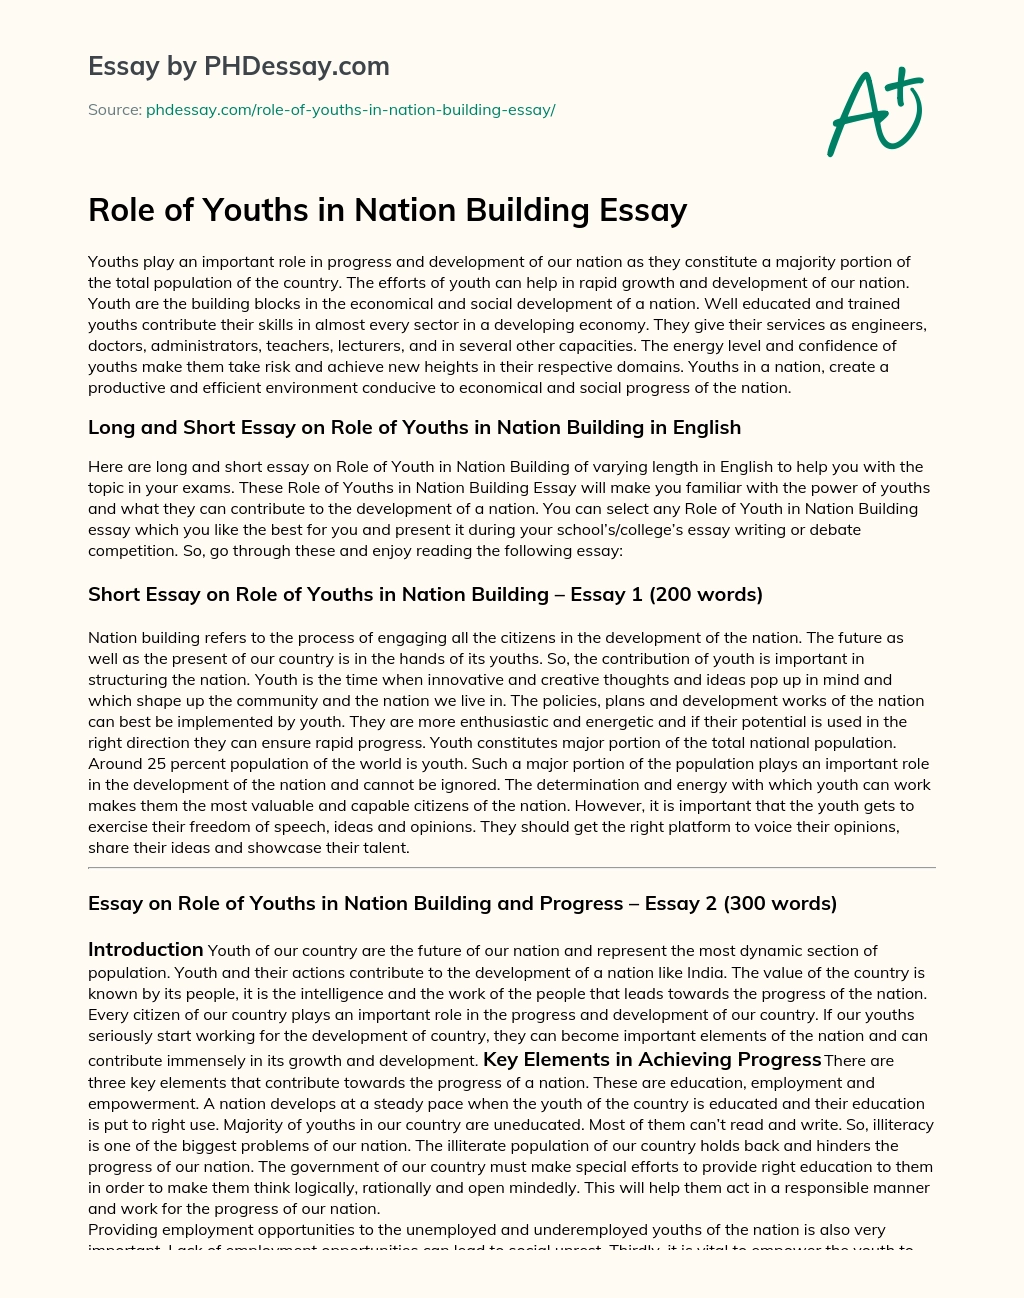 Role of Youths in Nation Building Essay essay